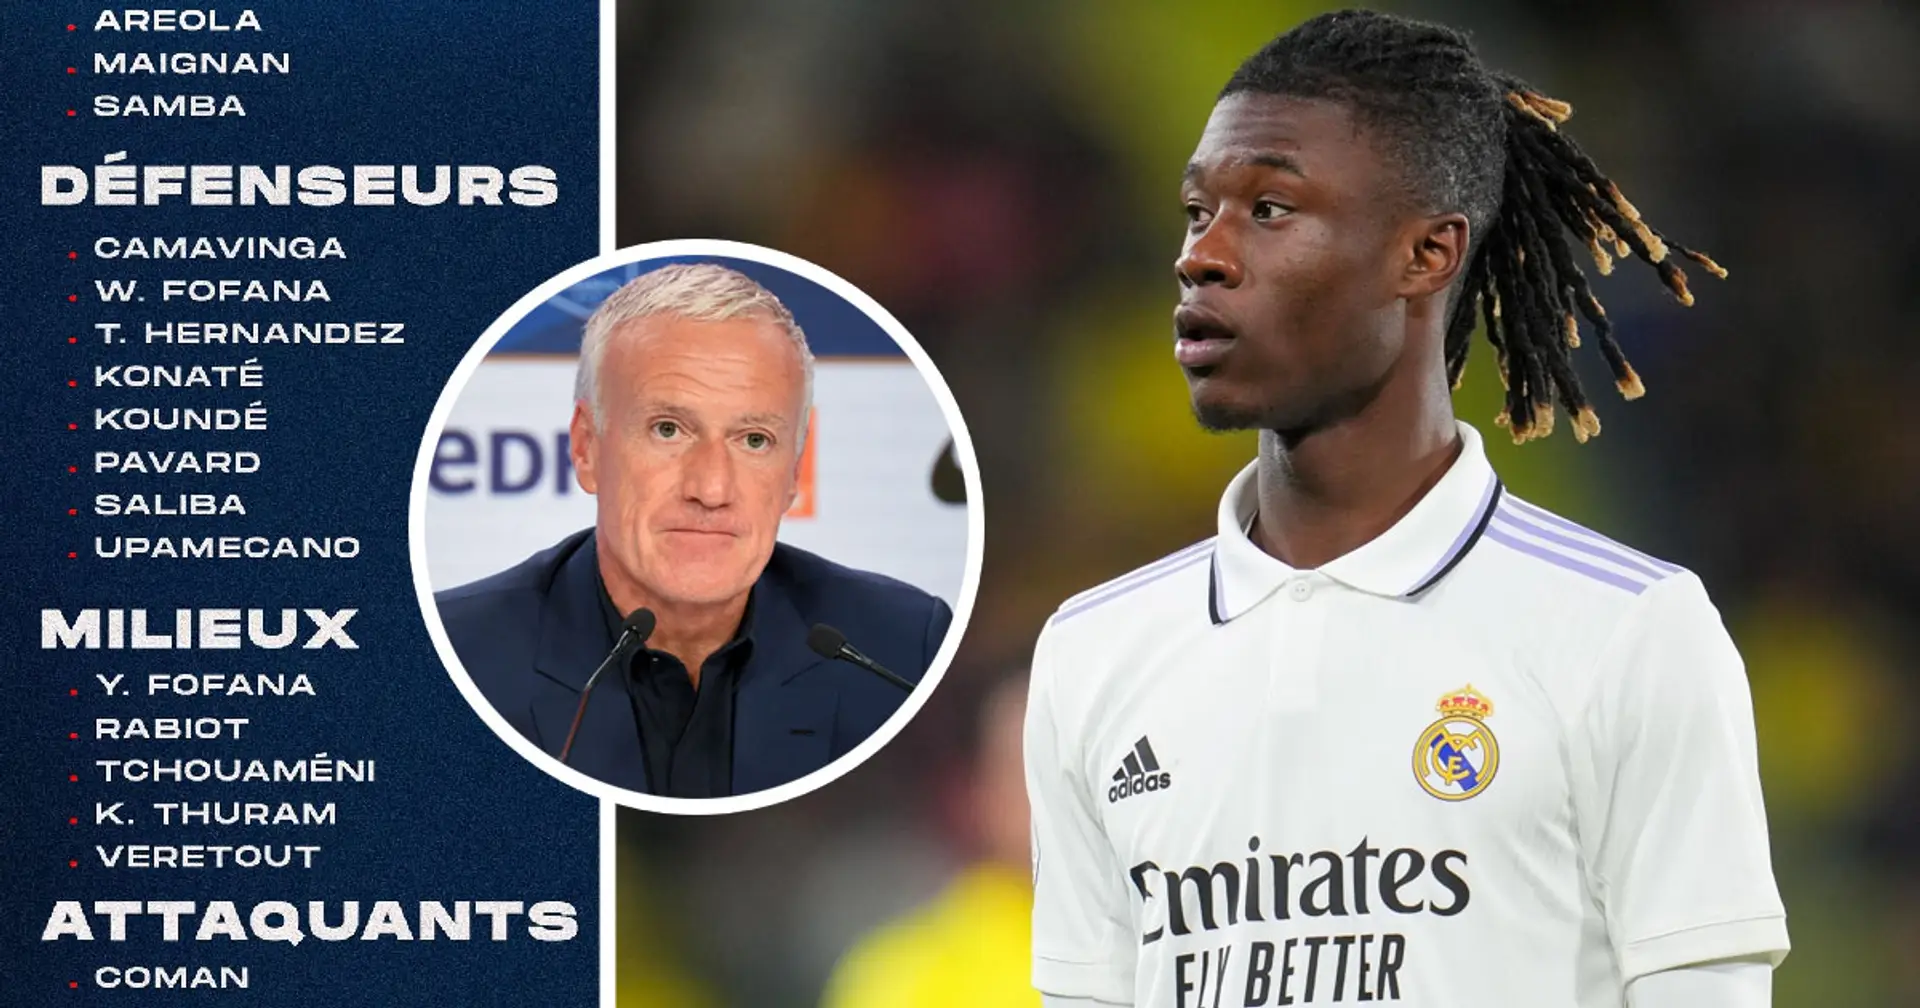 Camavinga included in France's squad as a defender, Deschamps explains why